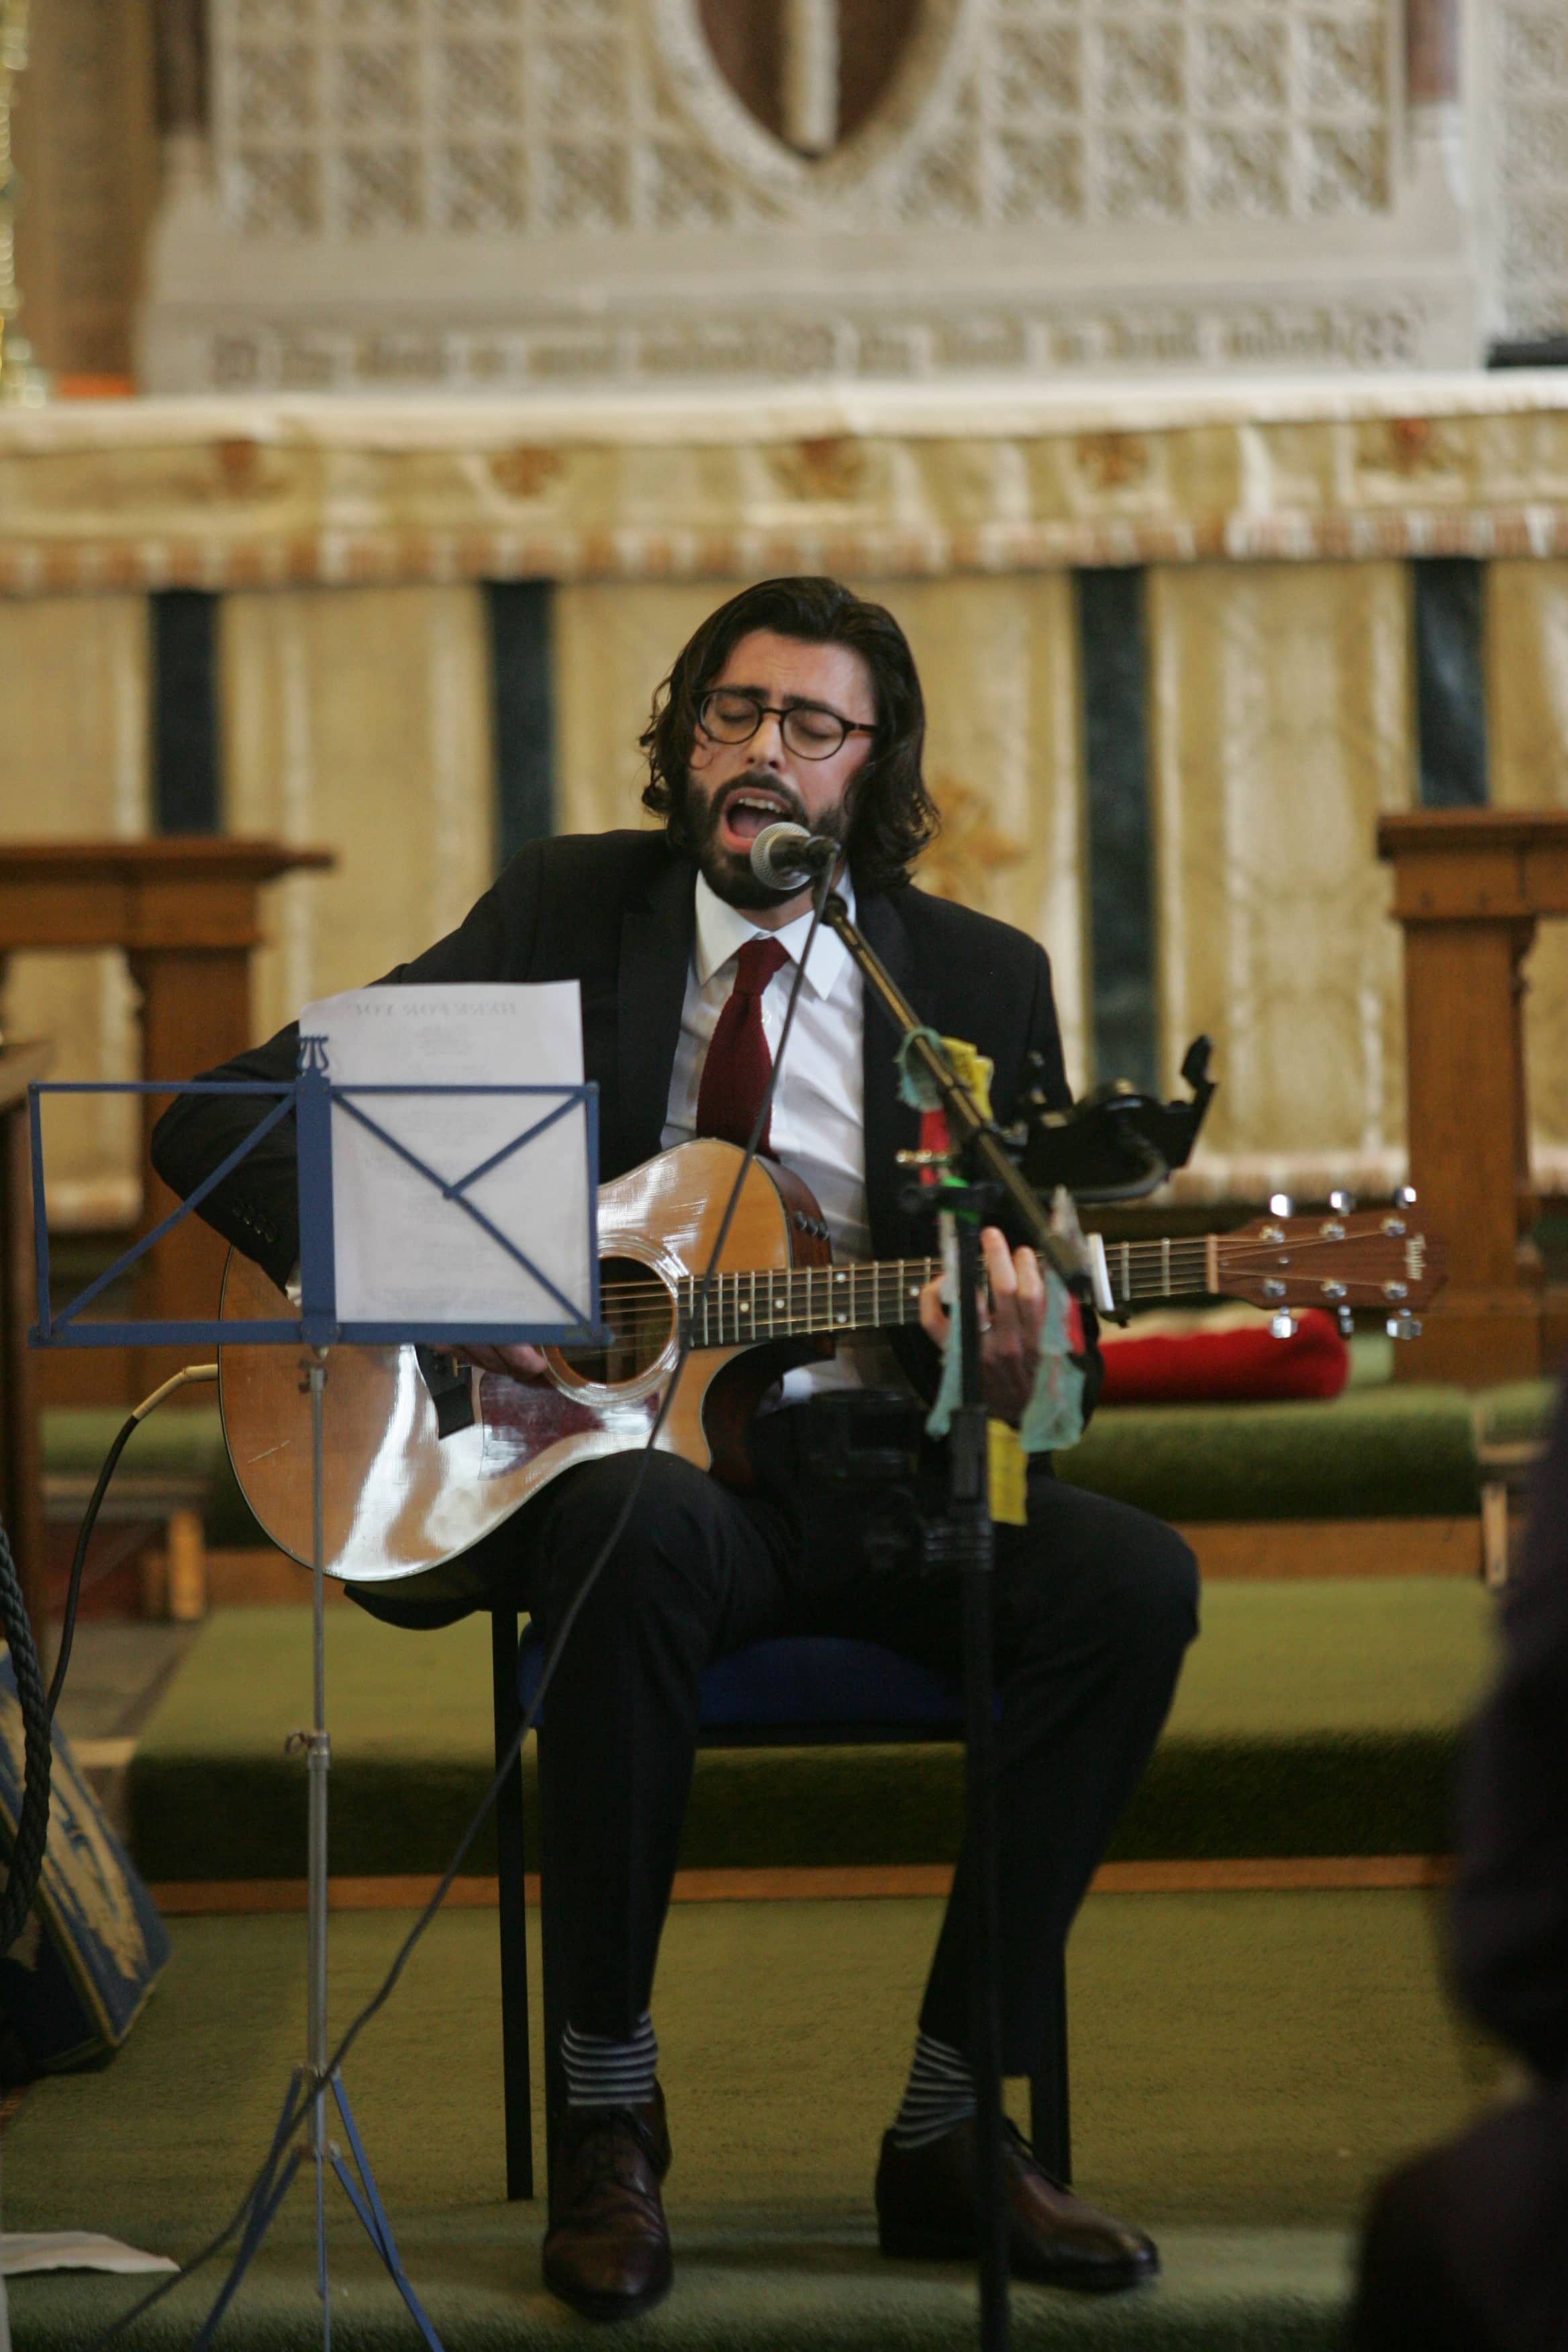  An image of the acoustic musician sat down with his acoustic guitar performing one of his indie-style folk songs as part of the wedding ceremony. 